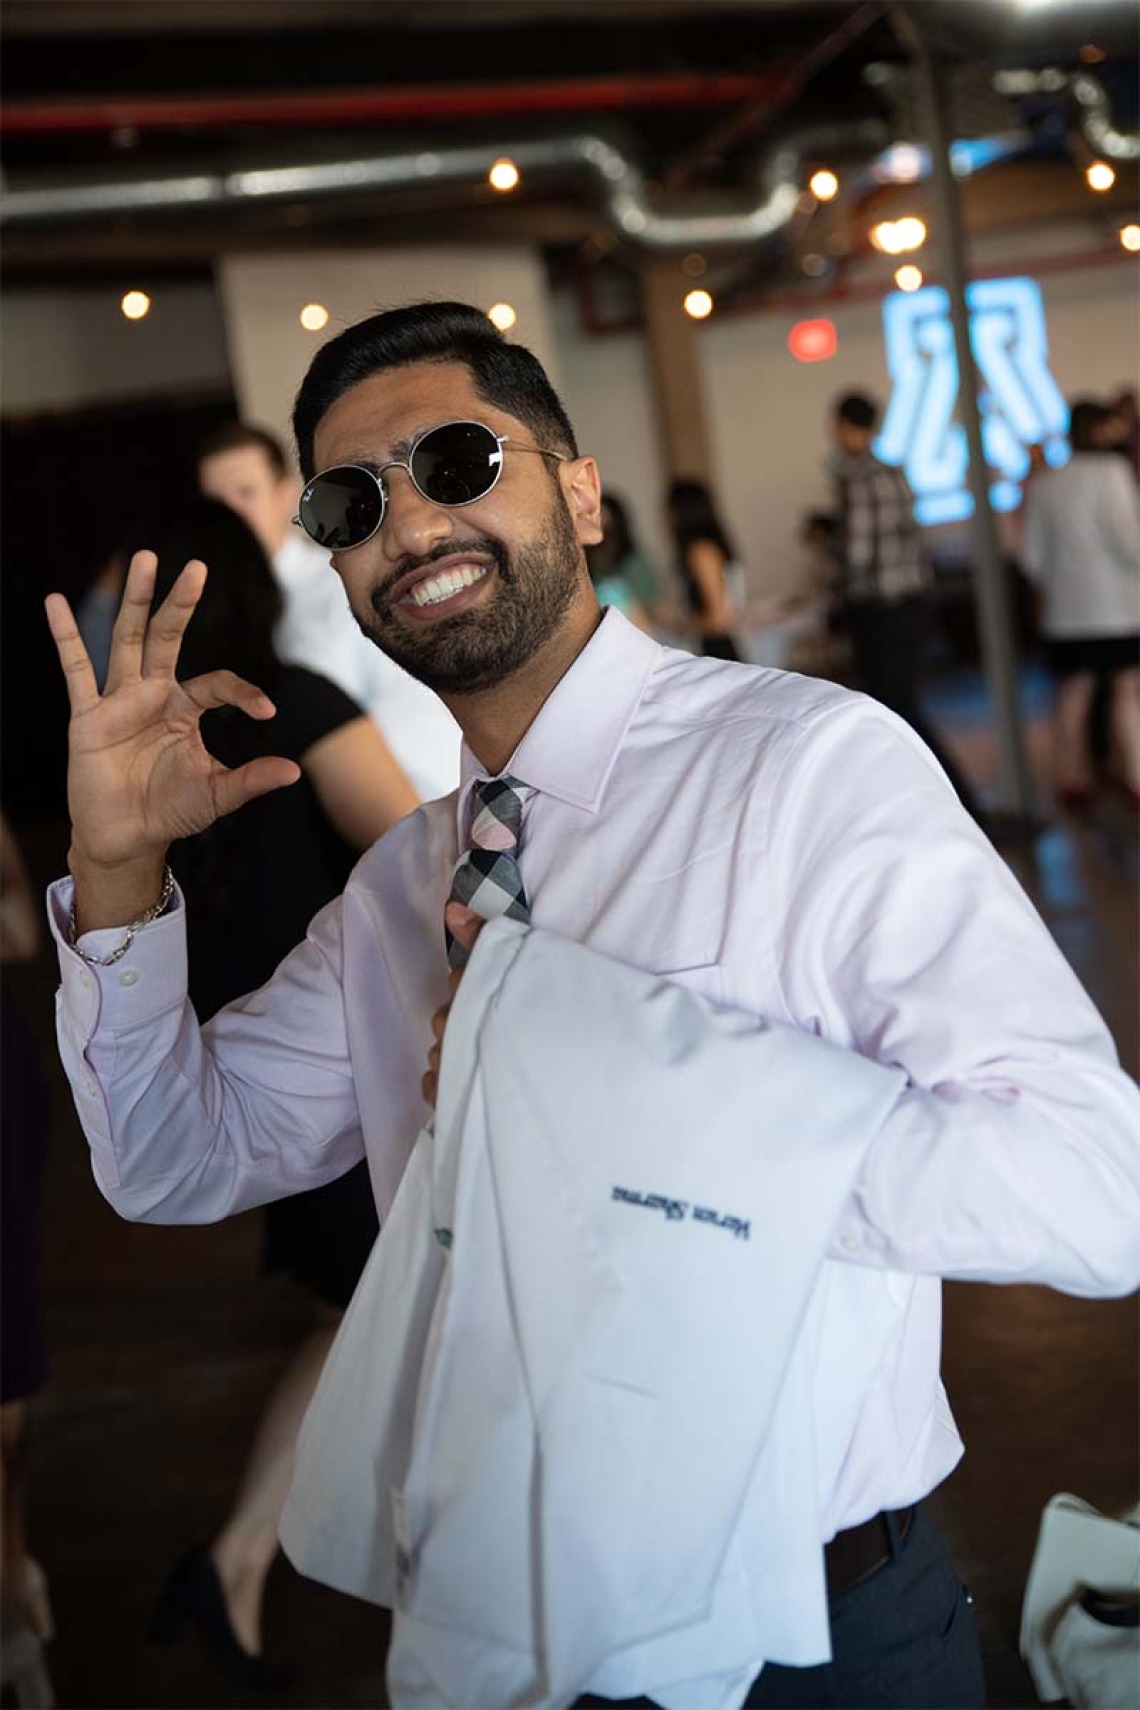 Varun Sharma pauses to give the Wildcat sign before the Class of 2024 white coat ceremony begins.